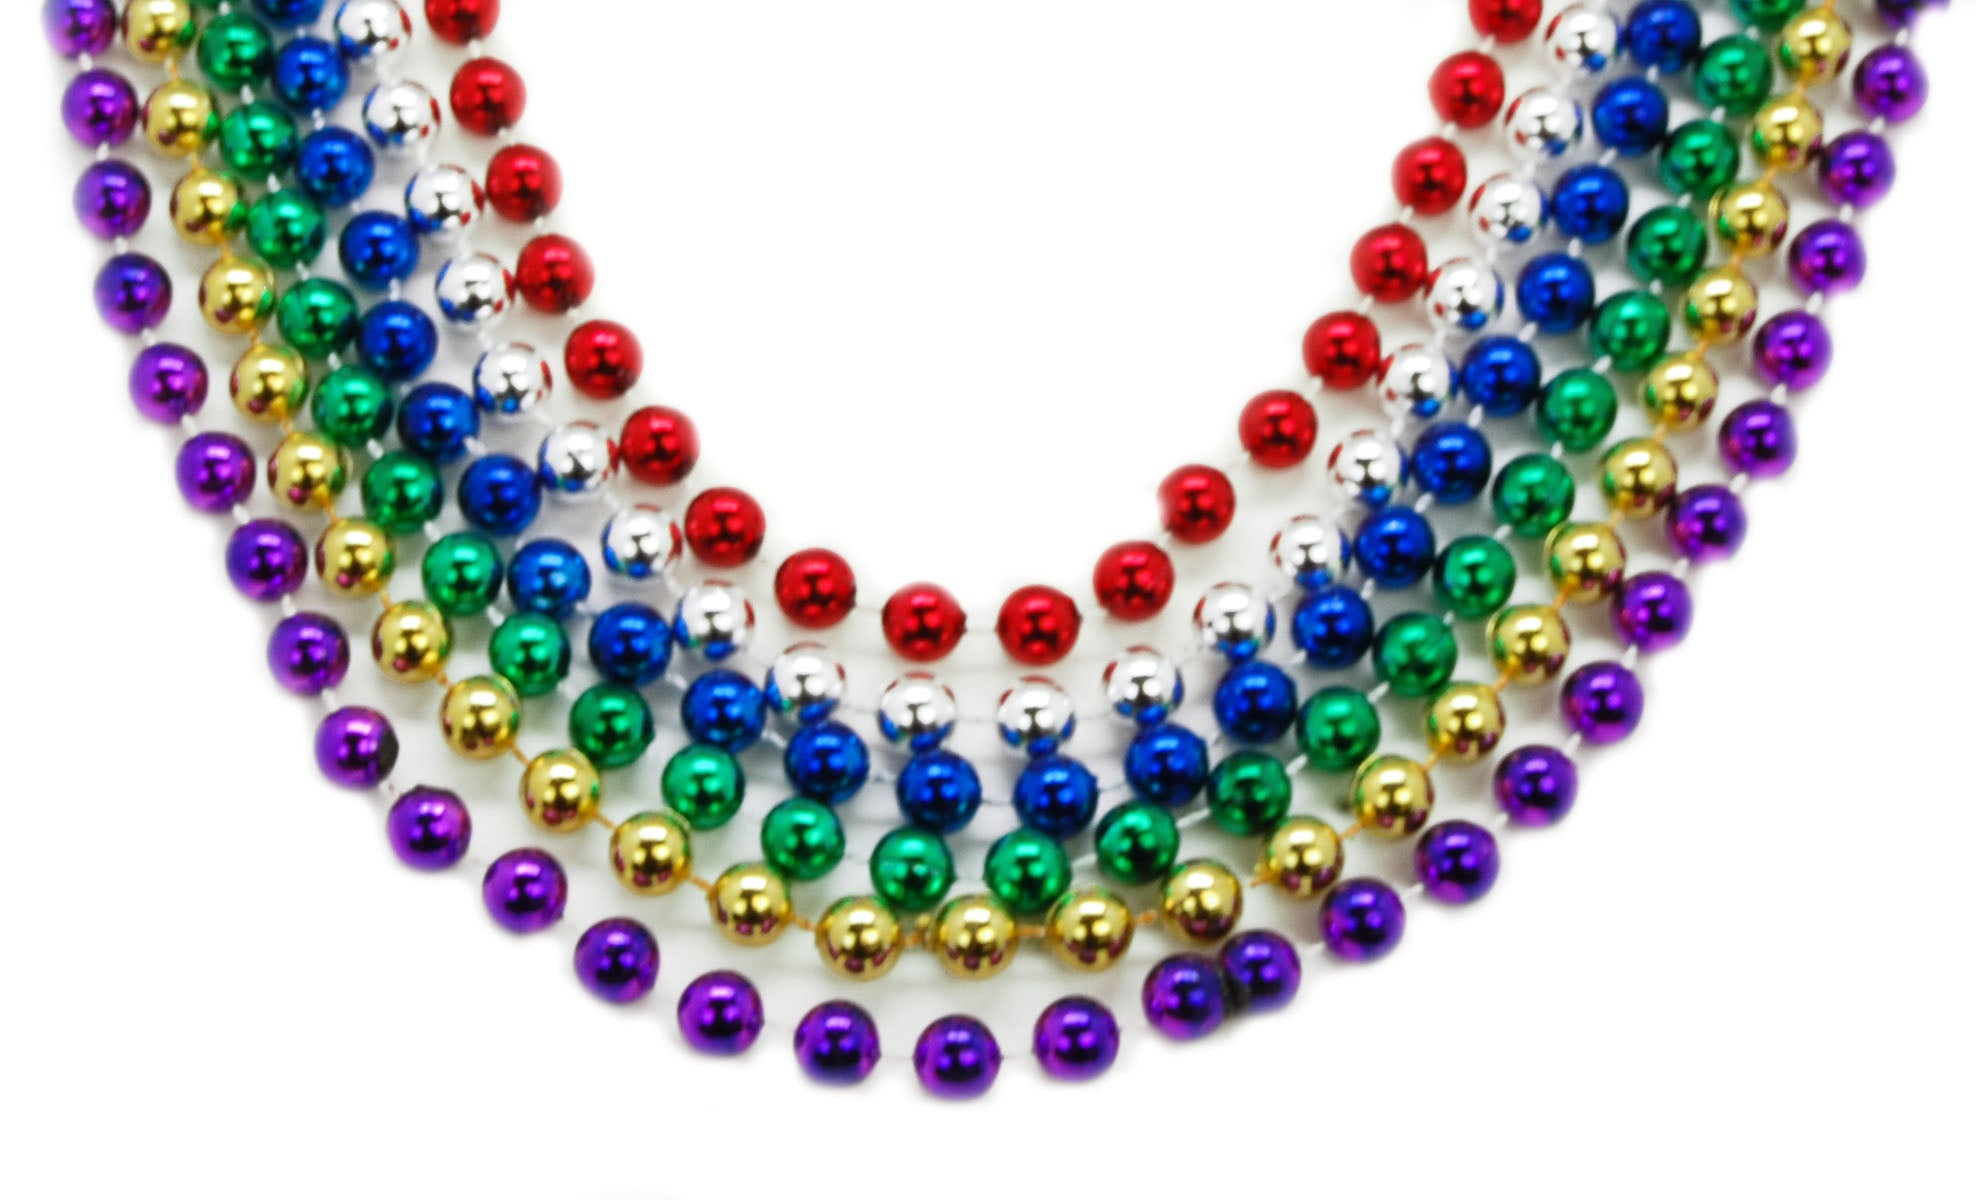 10mm Round 40 Beads - 6 Colors